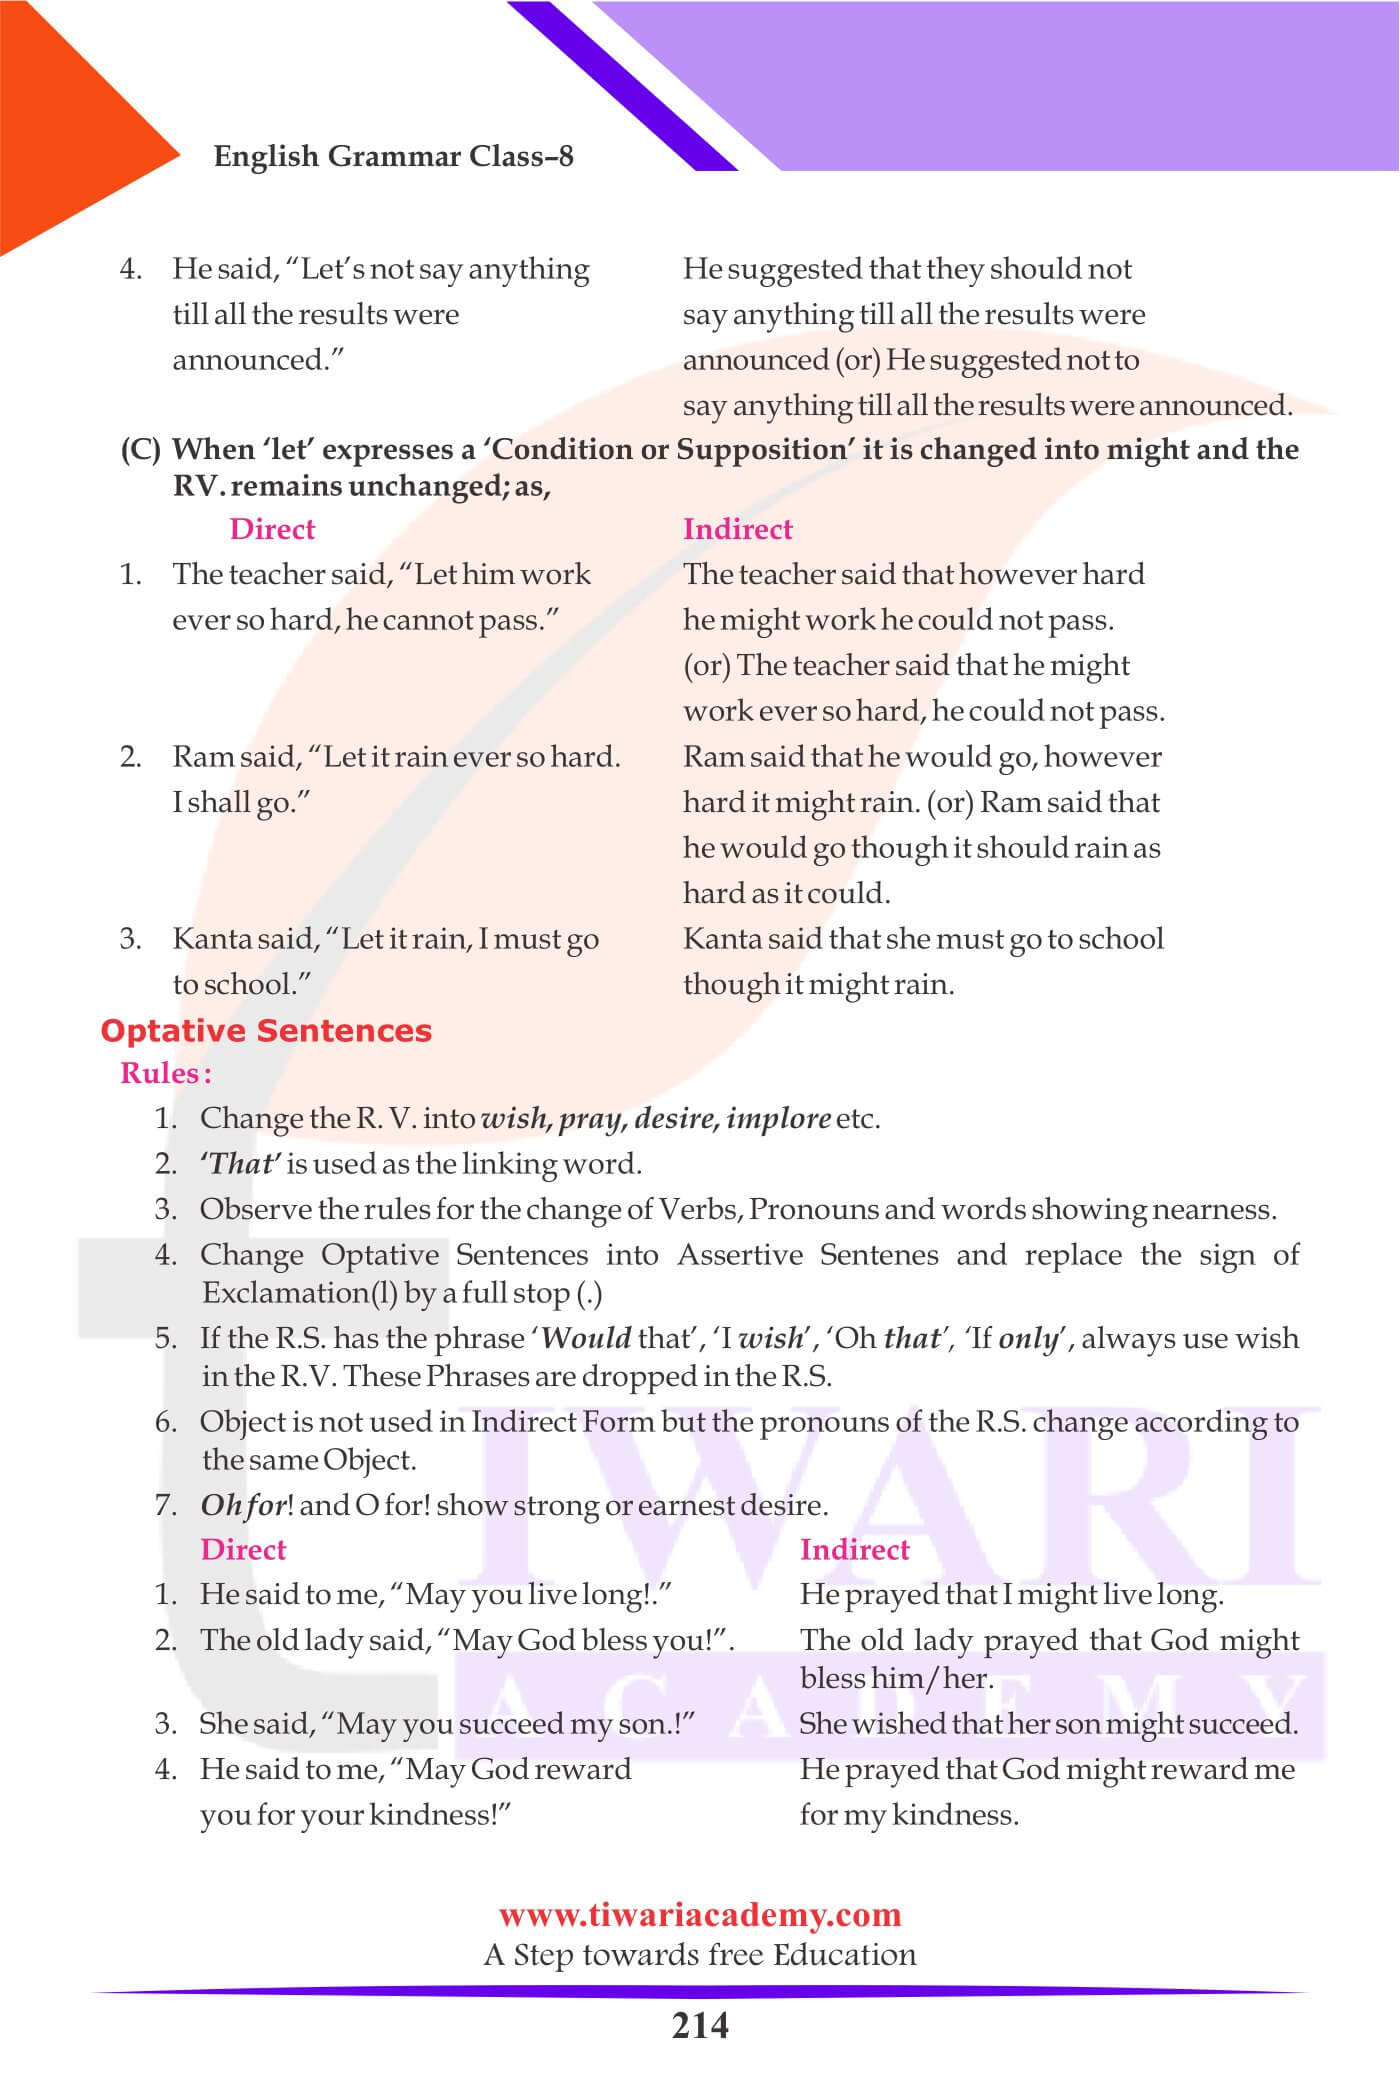 Class 8 Grammar Direct and Indirect exercises